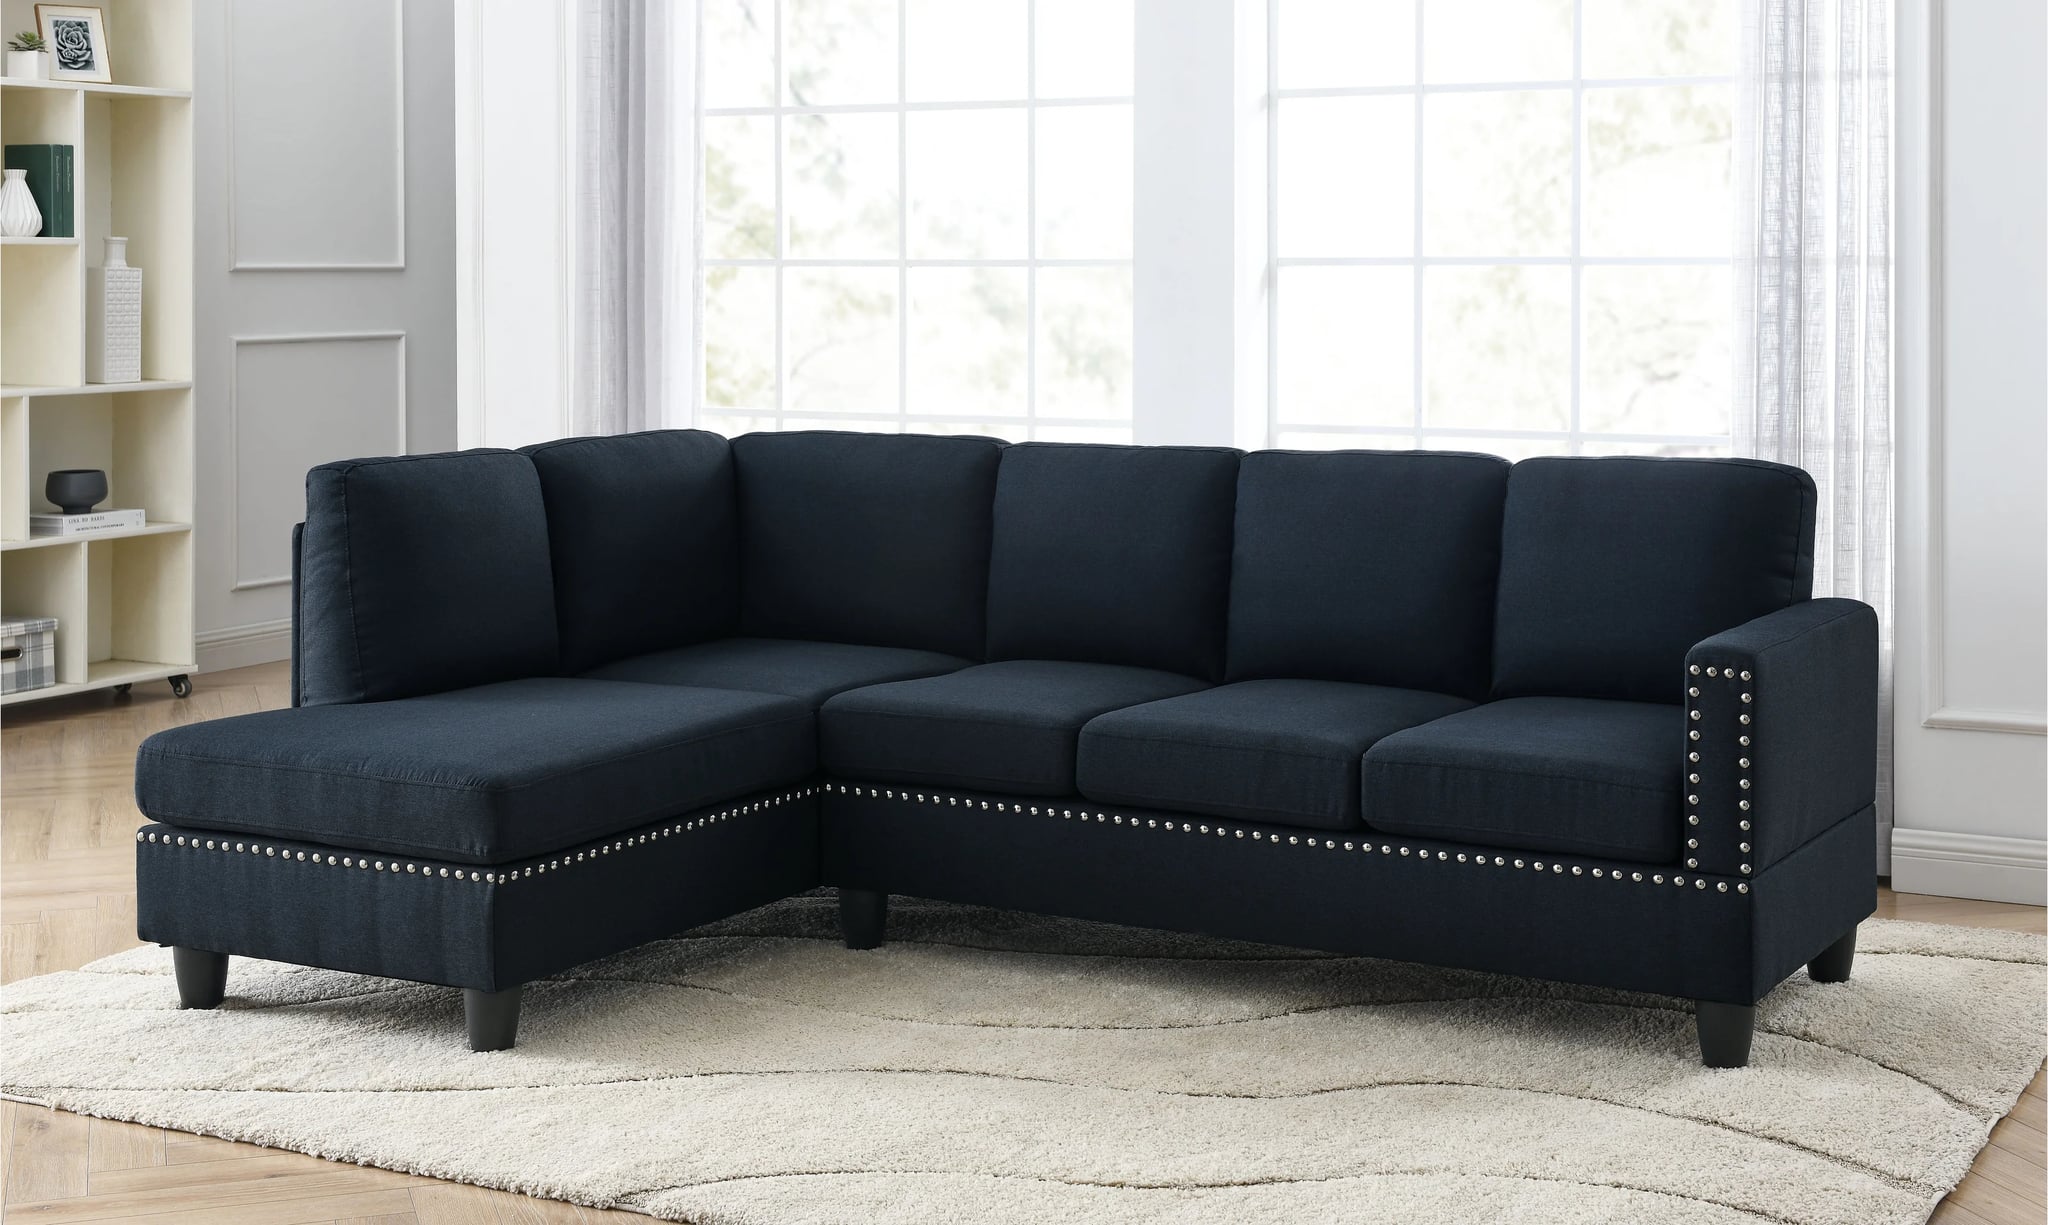 Nordamerika buste server A 4-Person Couch: Renner Wide Sofa and Chaise | The Best Sofas You Can  Score in Wayfair's 2-Day Sale Event | POPSUGAR Home Photo 6